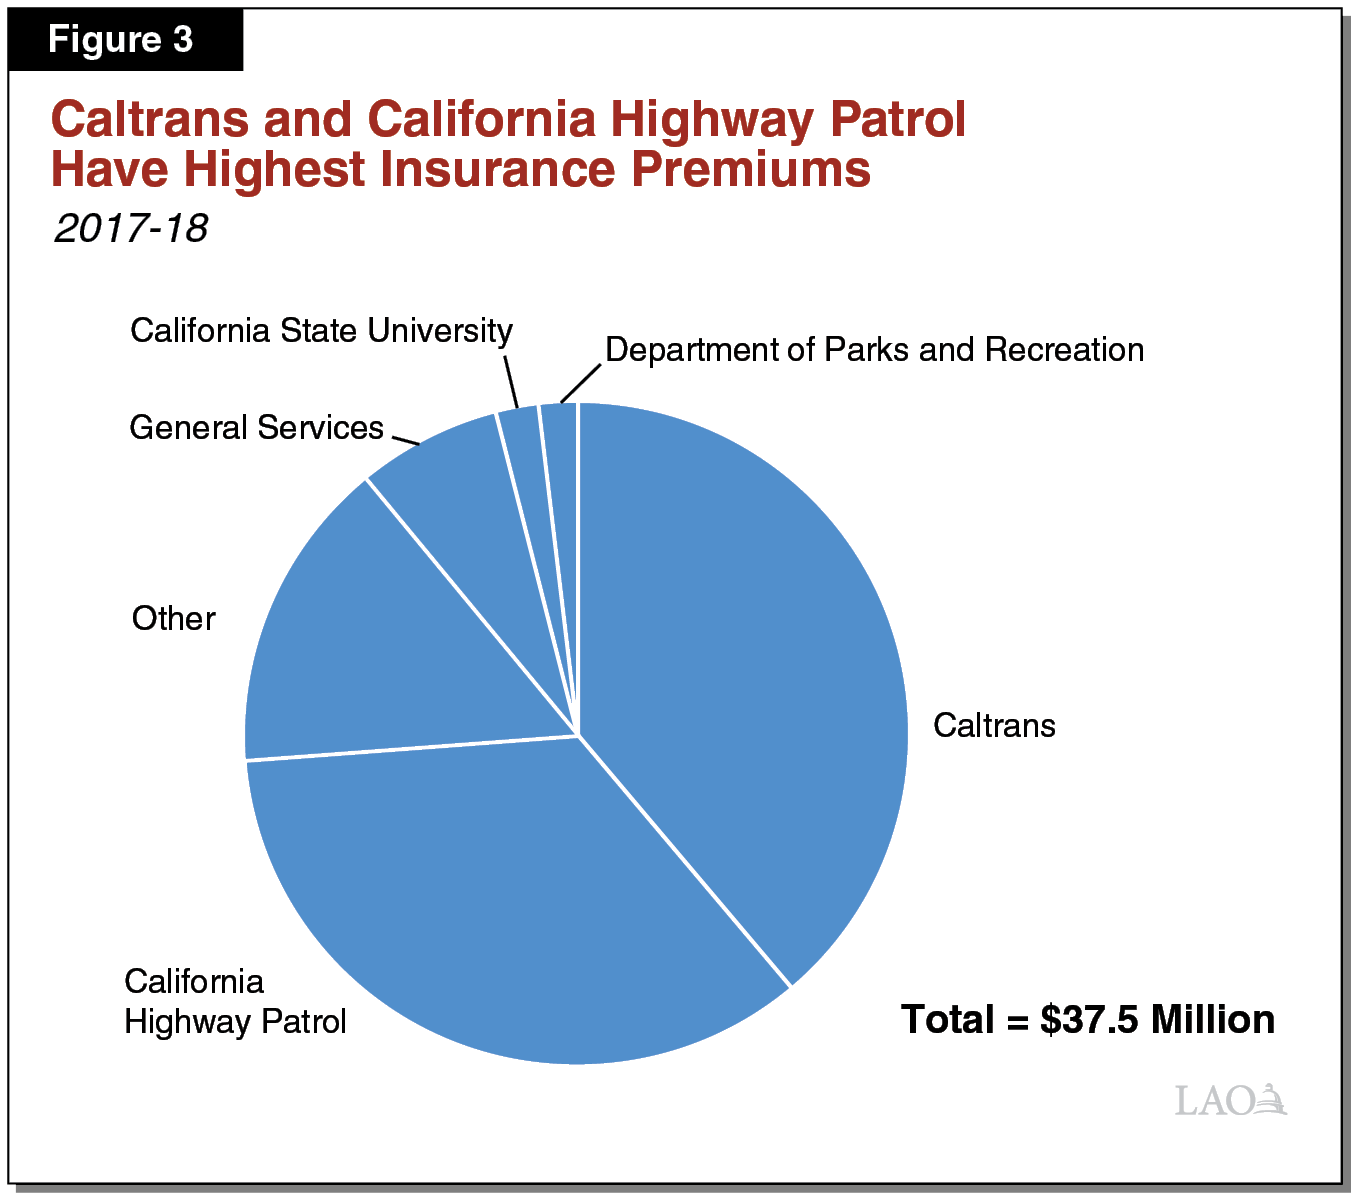 Figure 3 - Caltrans and California Highway Patrol Have Highest Insurance Premiums